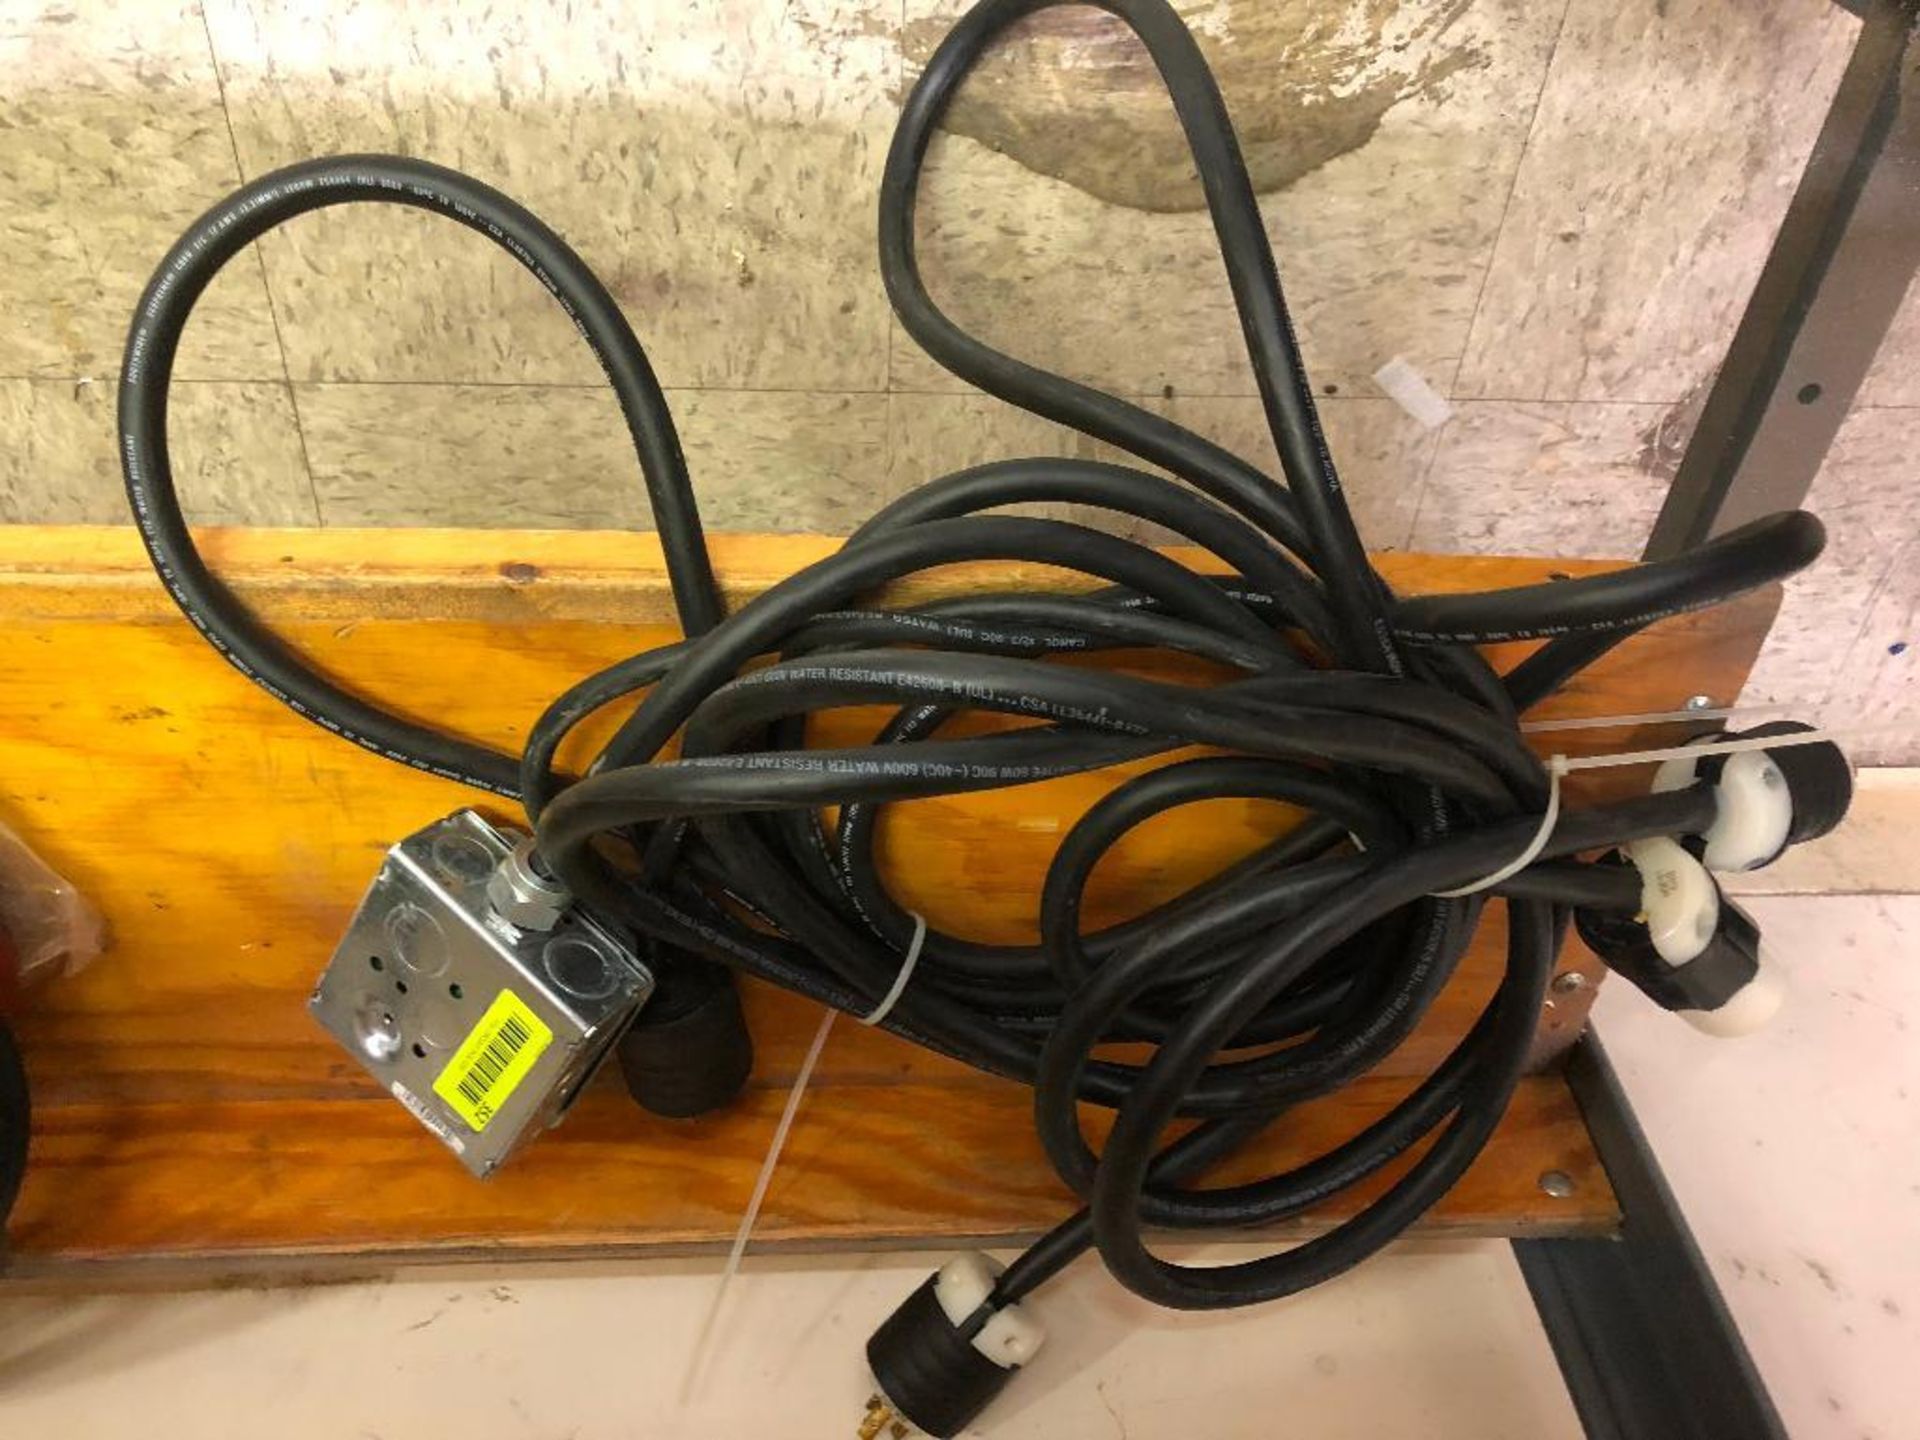 DESCRIPTION: 20 AMP EXTENSION CORD W/ OUTLET BOX. LOCATION: TOOL ROOM QTY: 1